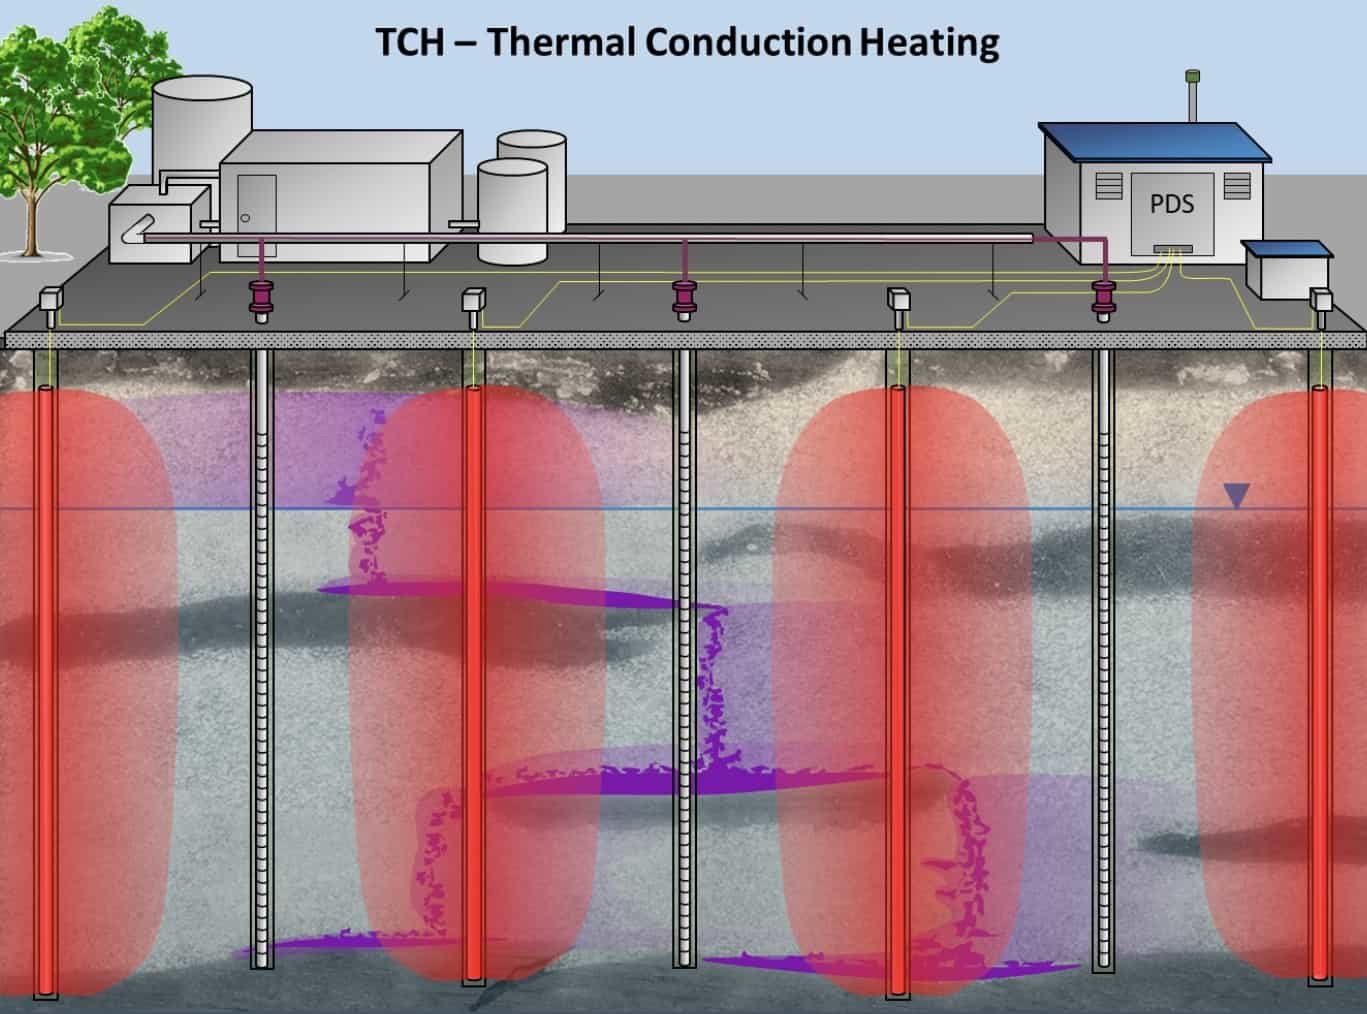 Thermal Conduction Heating (TCH)